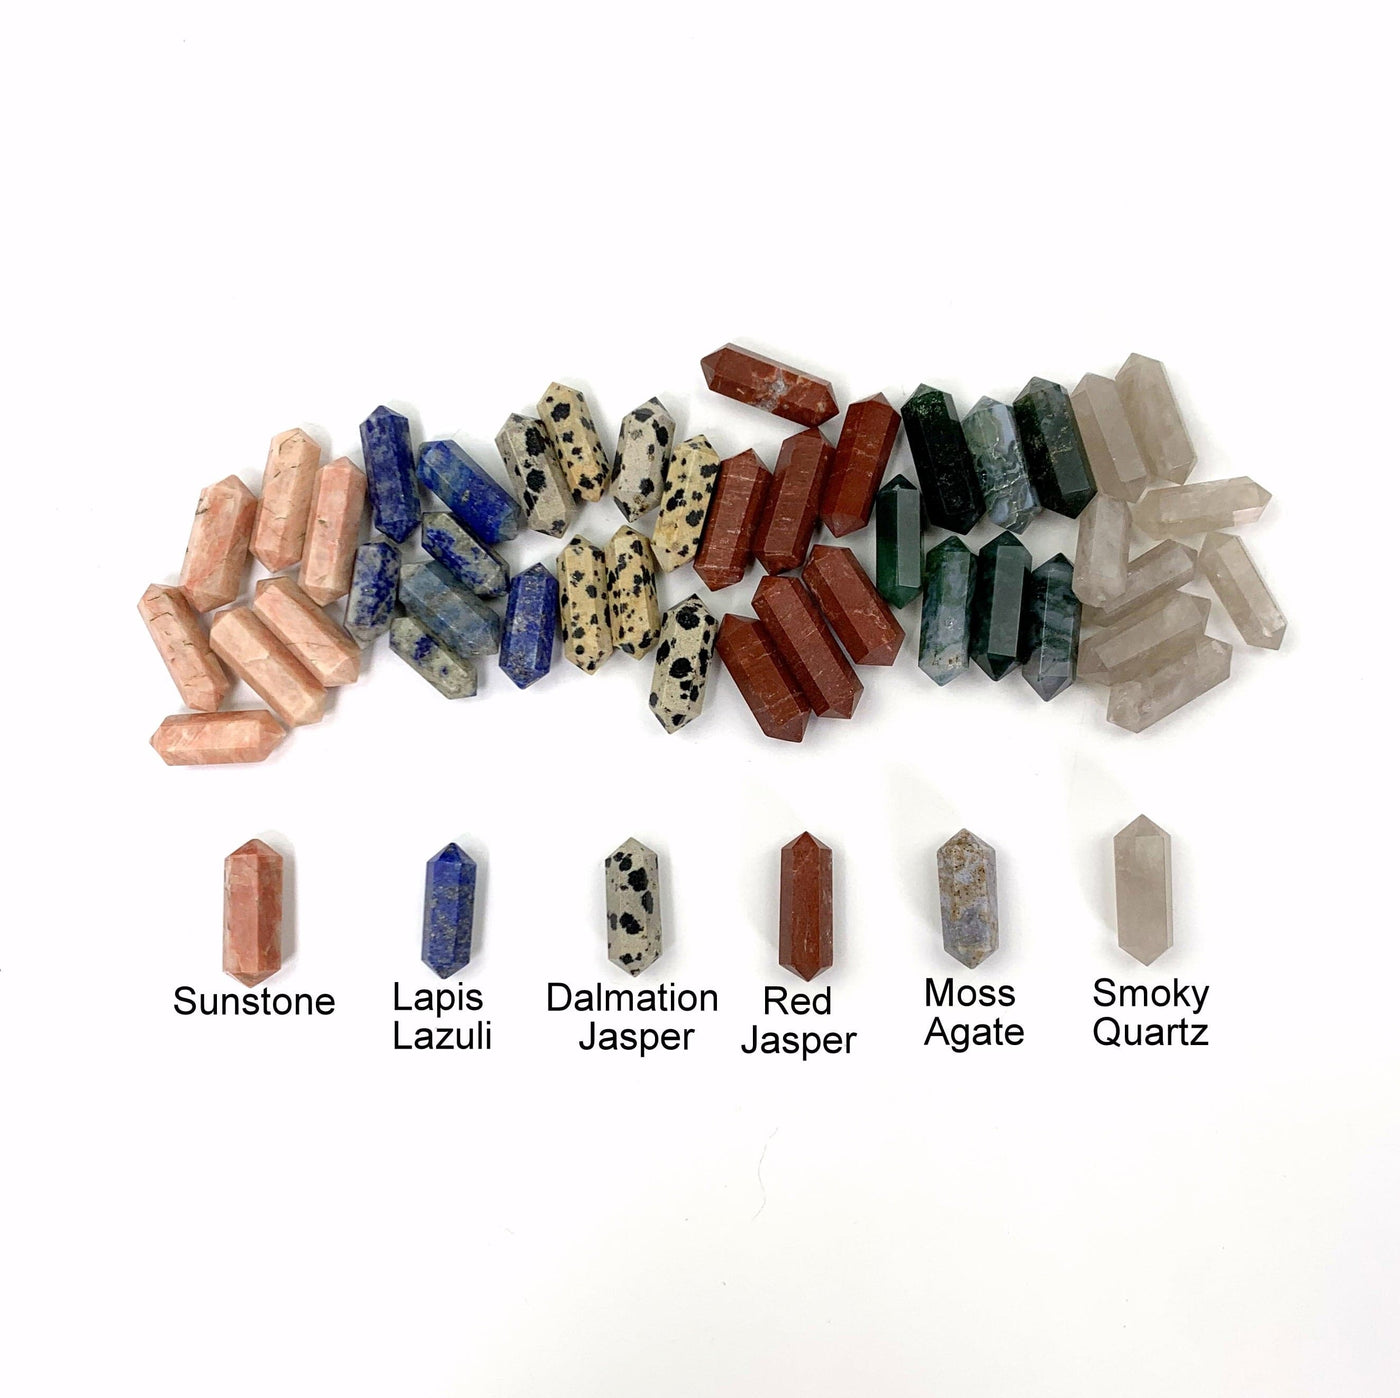 6 Gemstones Labeled With Writing and Piles of Their Respective Gemstone Above on white background.